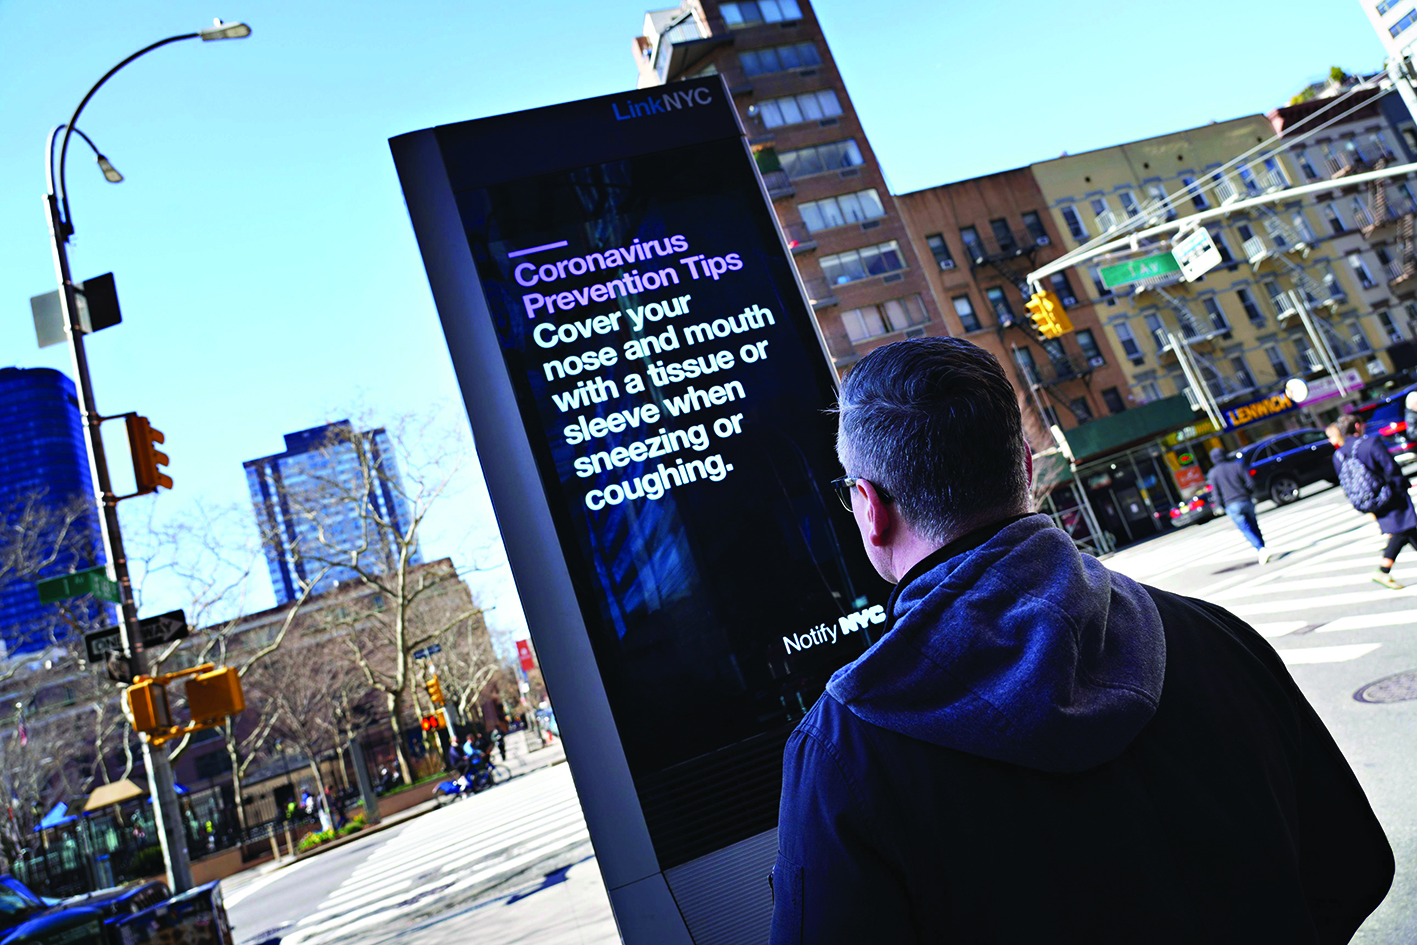 NEW YORK, - MARCH 15: A man reads a coronavirus prevention tip displayed on a LinkNYC box as the coronavirus continues to spread across the United States on March 15, 2020 in New York City. The World Health Organization declared coronavirus (COVID-19) a global pandemic on March 11th.   Cindy Ord/Getty Images/AFPn== FOR NEWSPAPERS, INTERNET, TELCOS &amp; TELEVISION USE ONLY ==